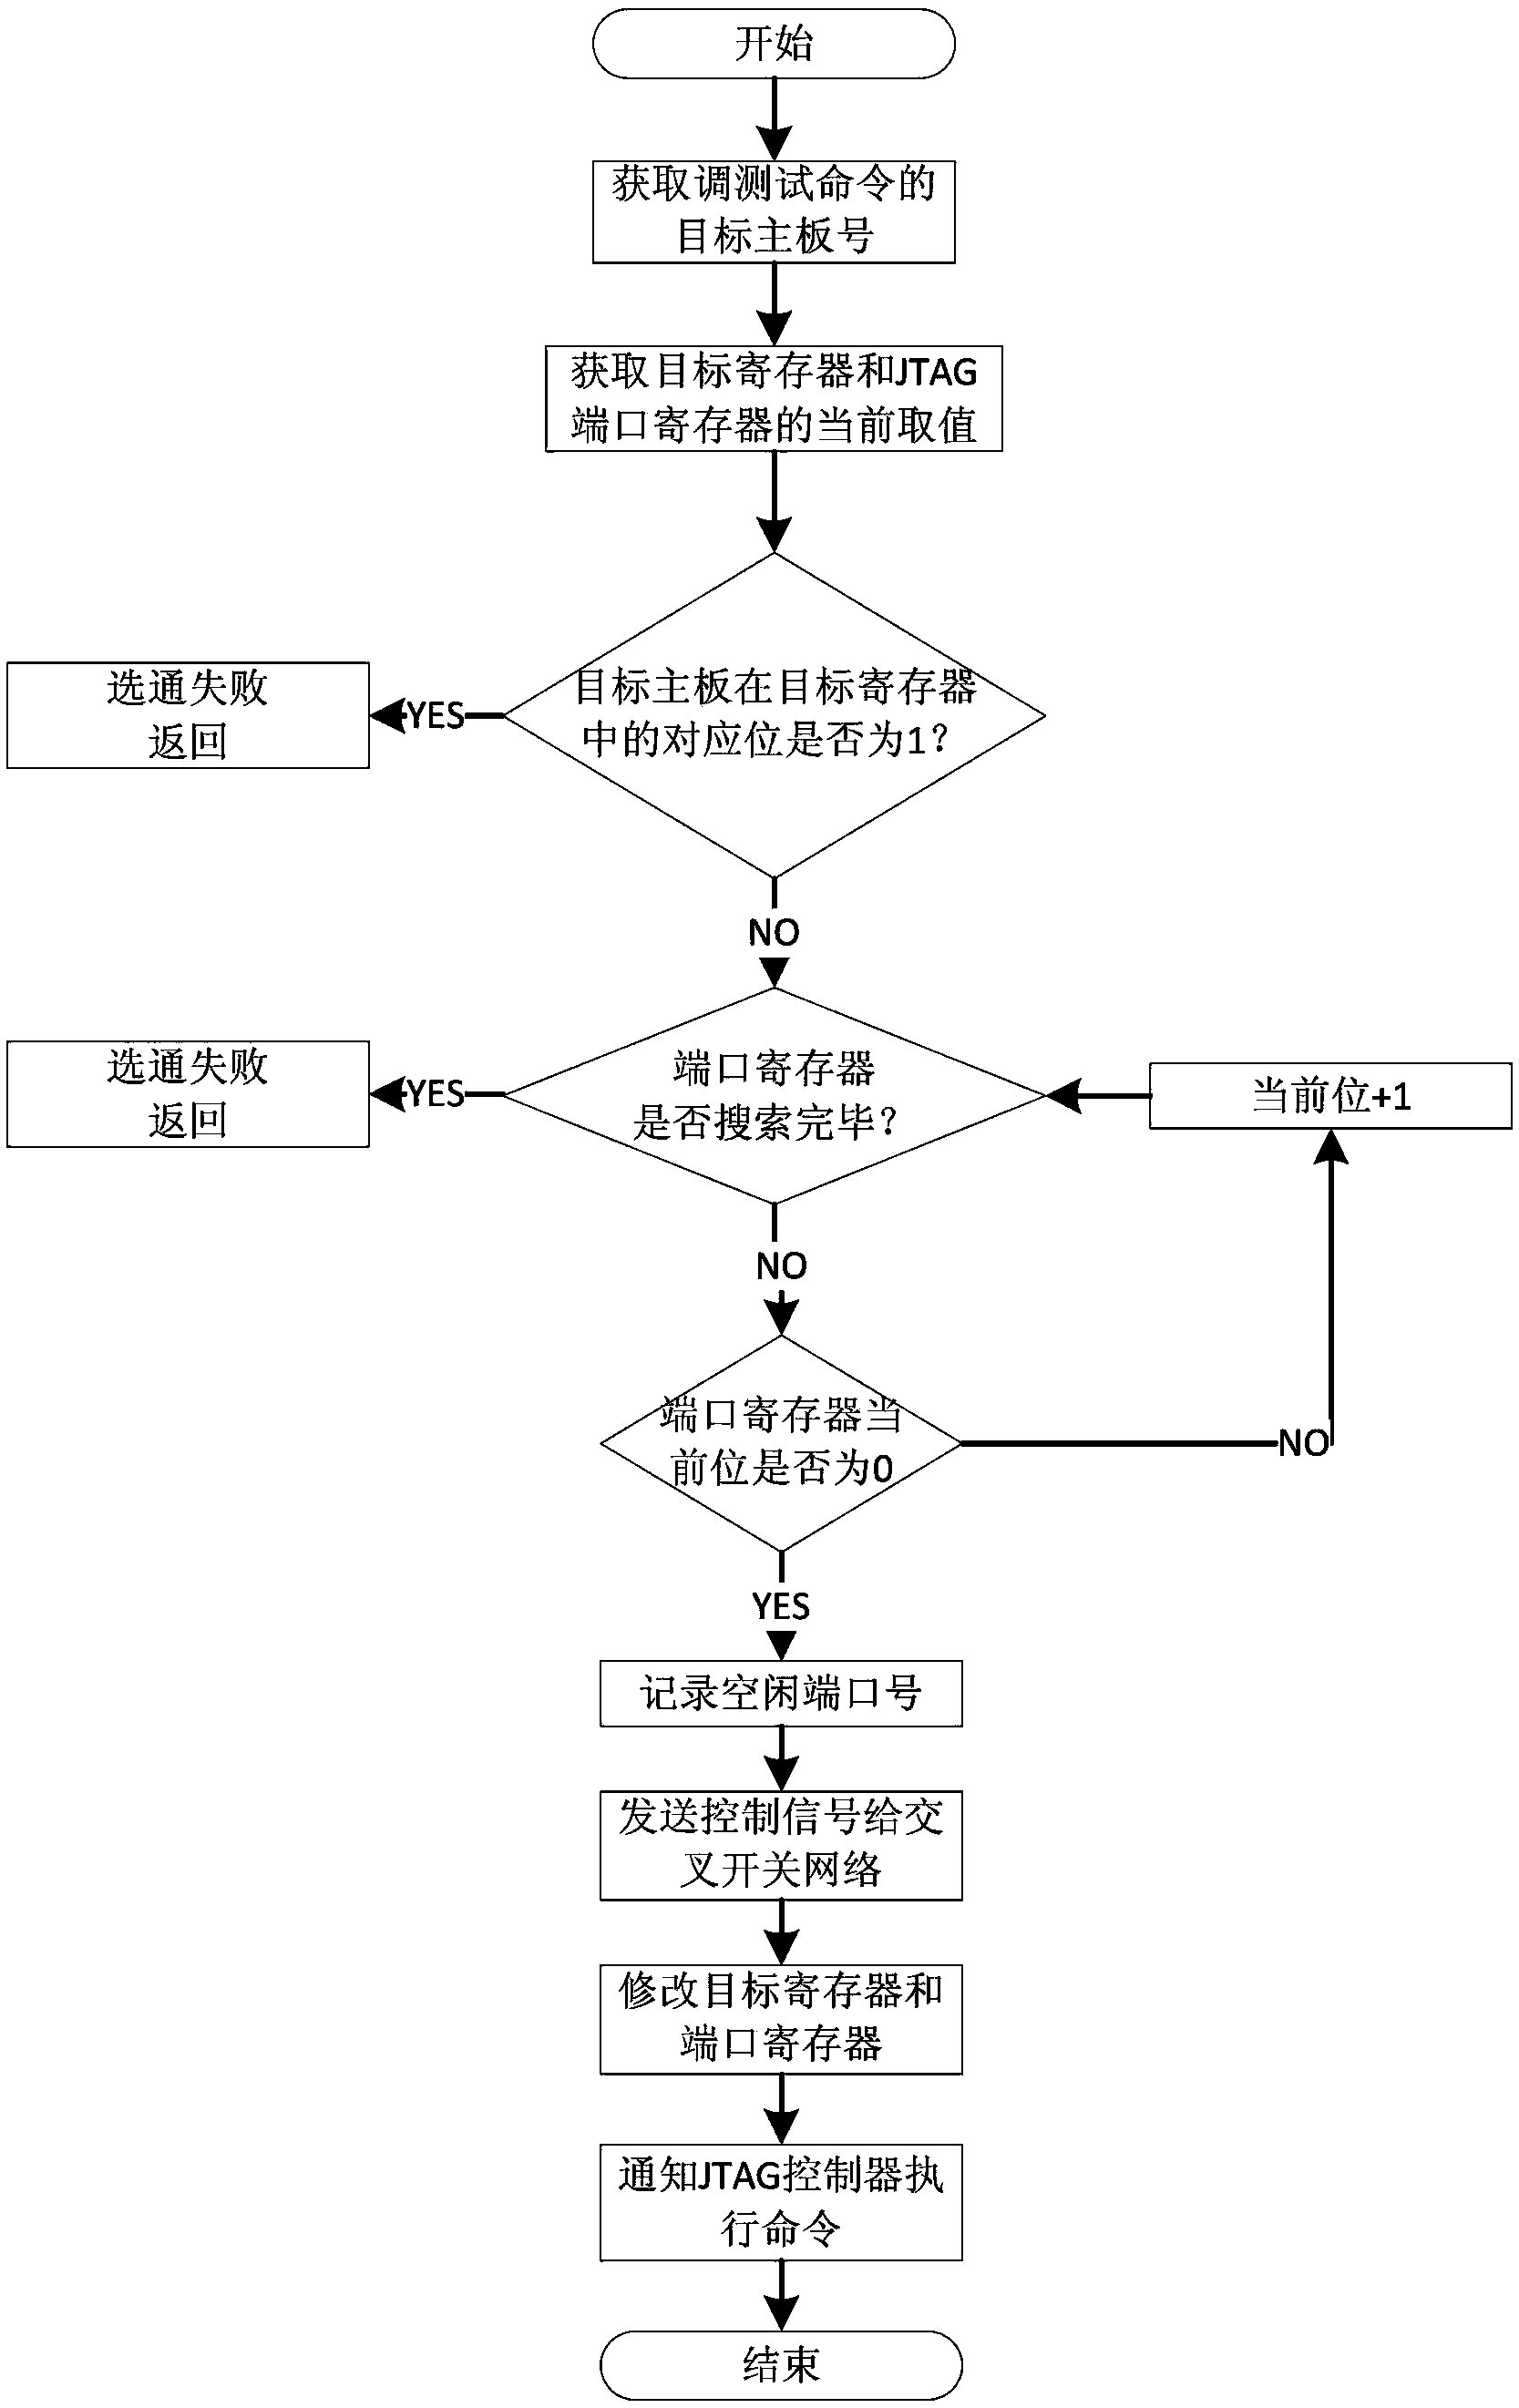 Super computing system oriented self-gating boundary scan test method and device